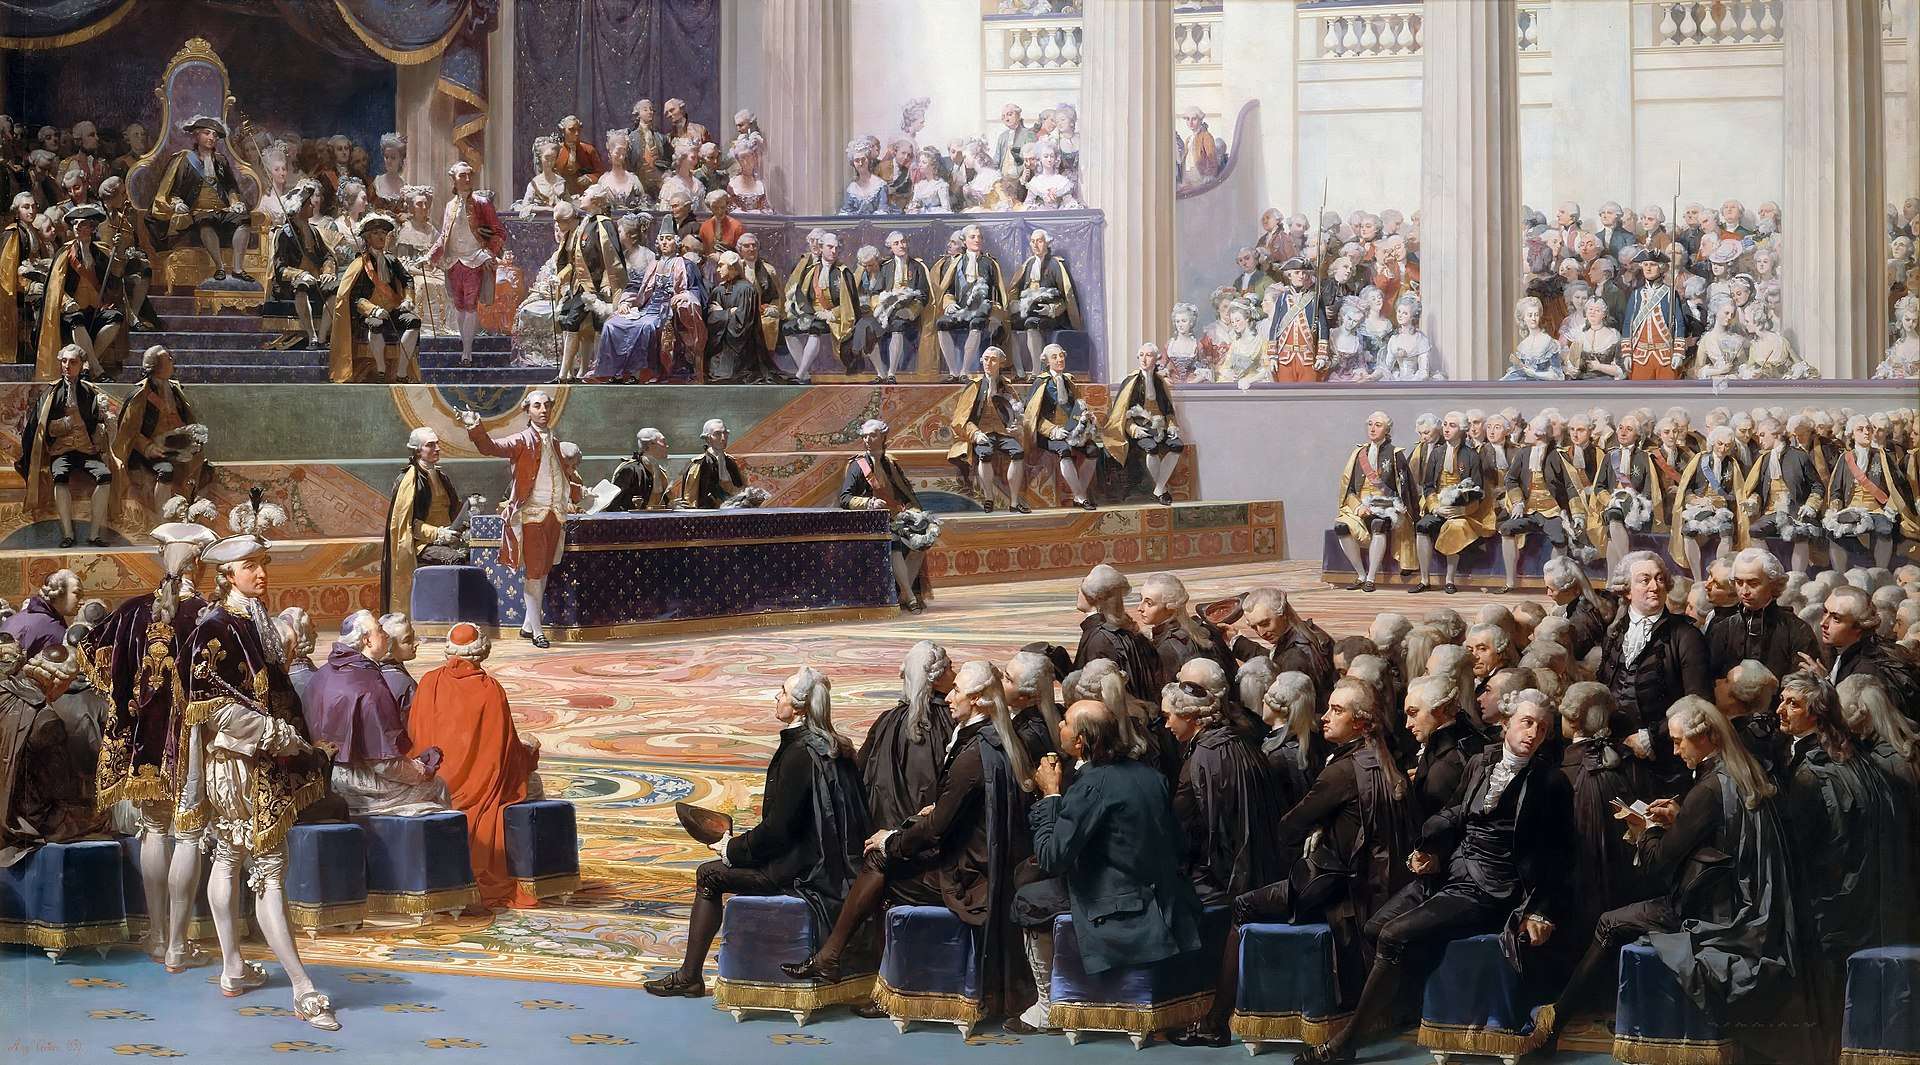 On 4 and 5 May 1789 Germaine de Staël watched the assembly of the Estates-General in Versailles